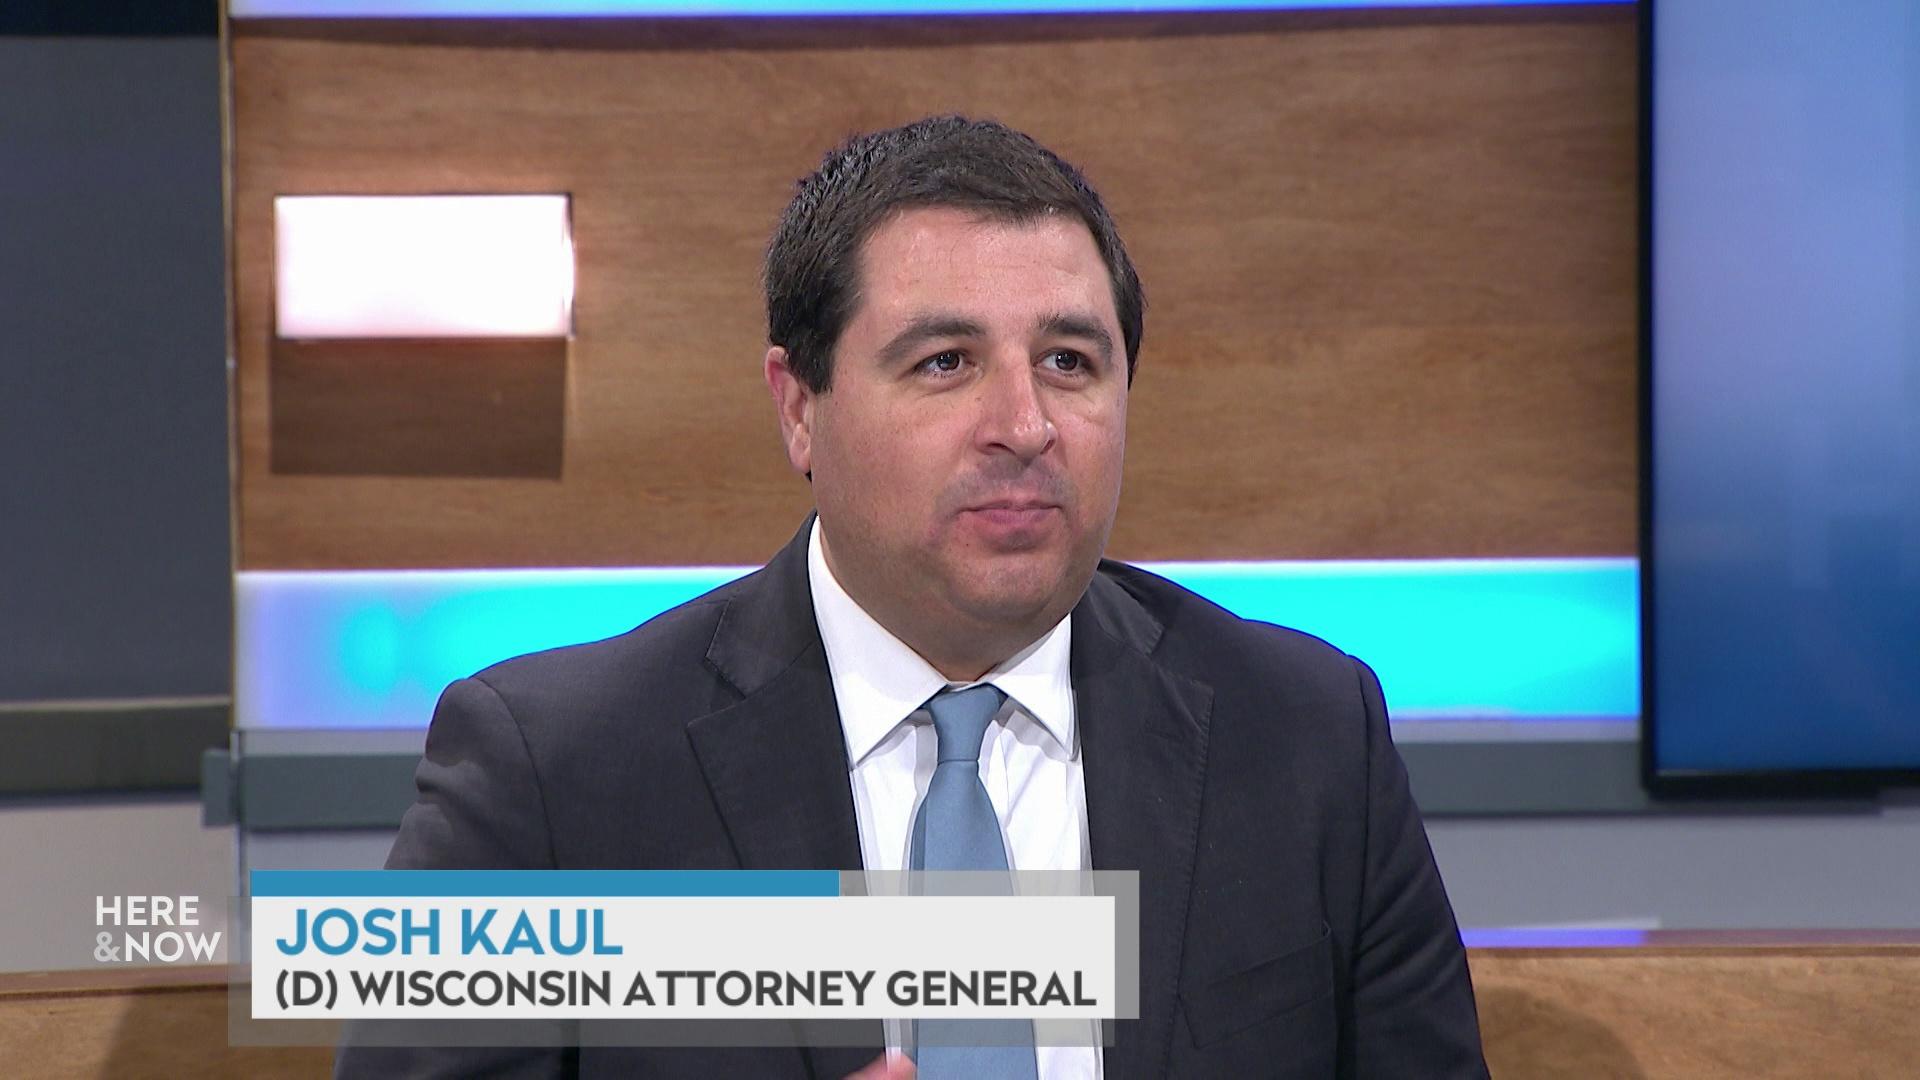 A still image from a video shows Josh Kaul seated at the 'Here & Now' set featuring wood paneling, with a graphic at bottom reading 'Josh Kaul' and '(D) Wisconsin Attorney General.'